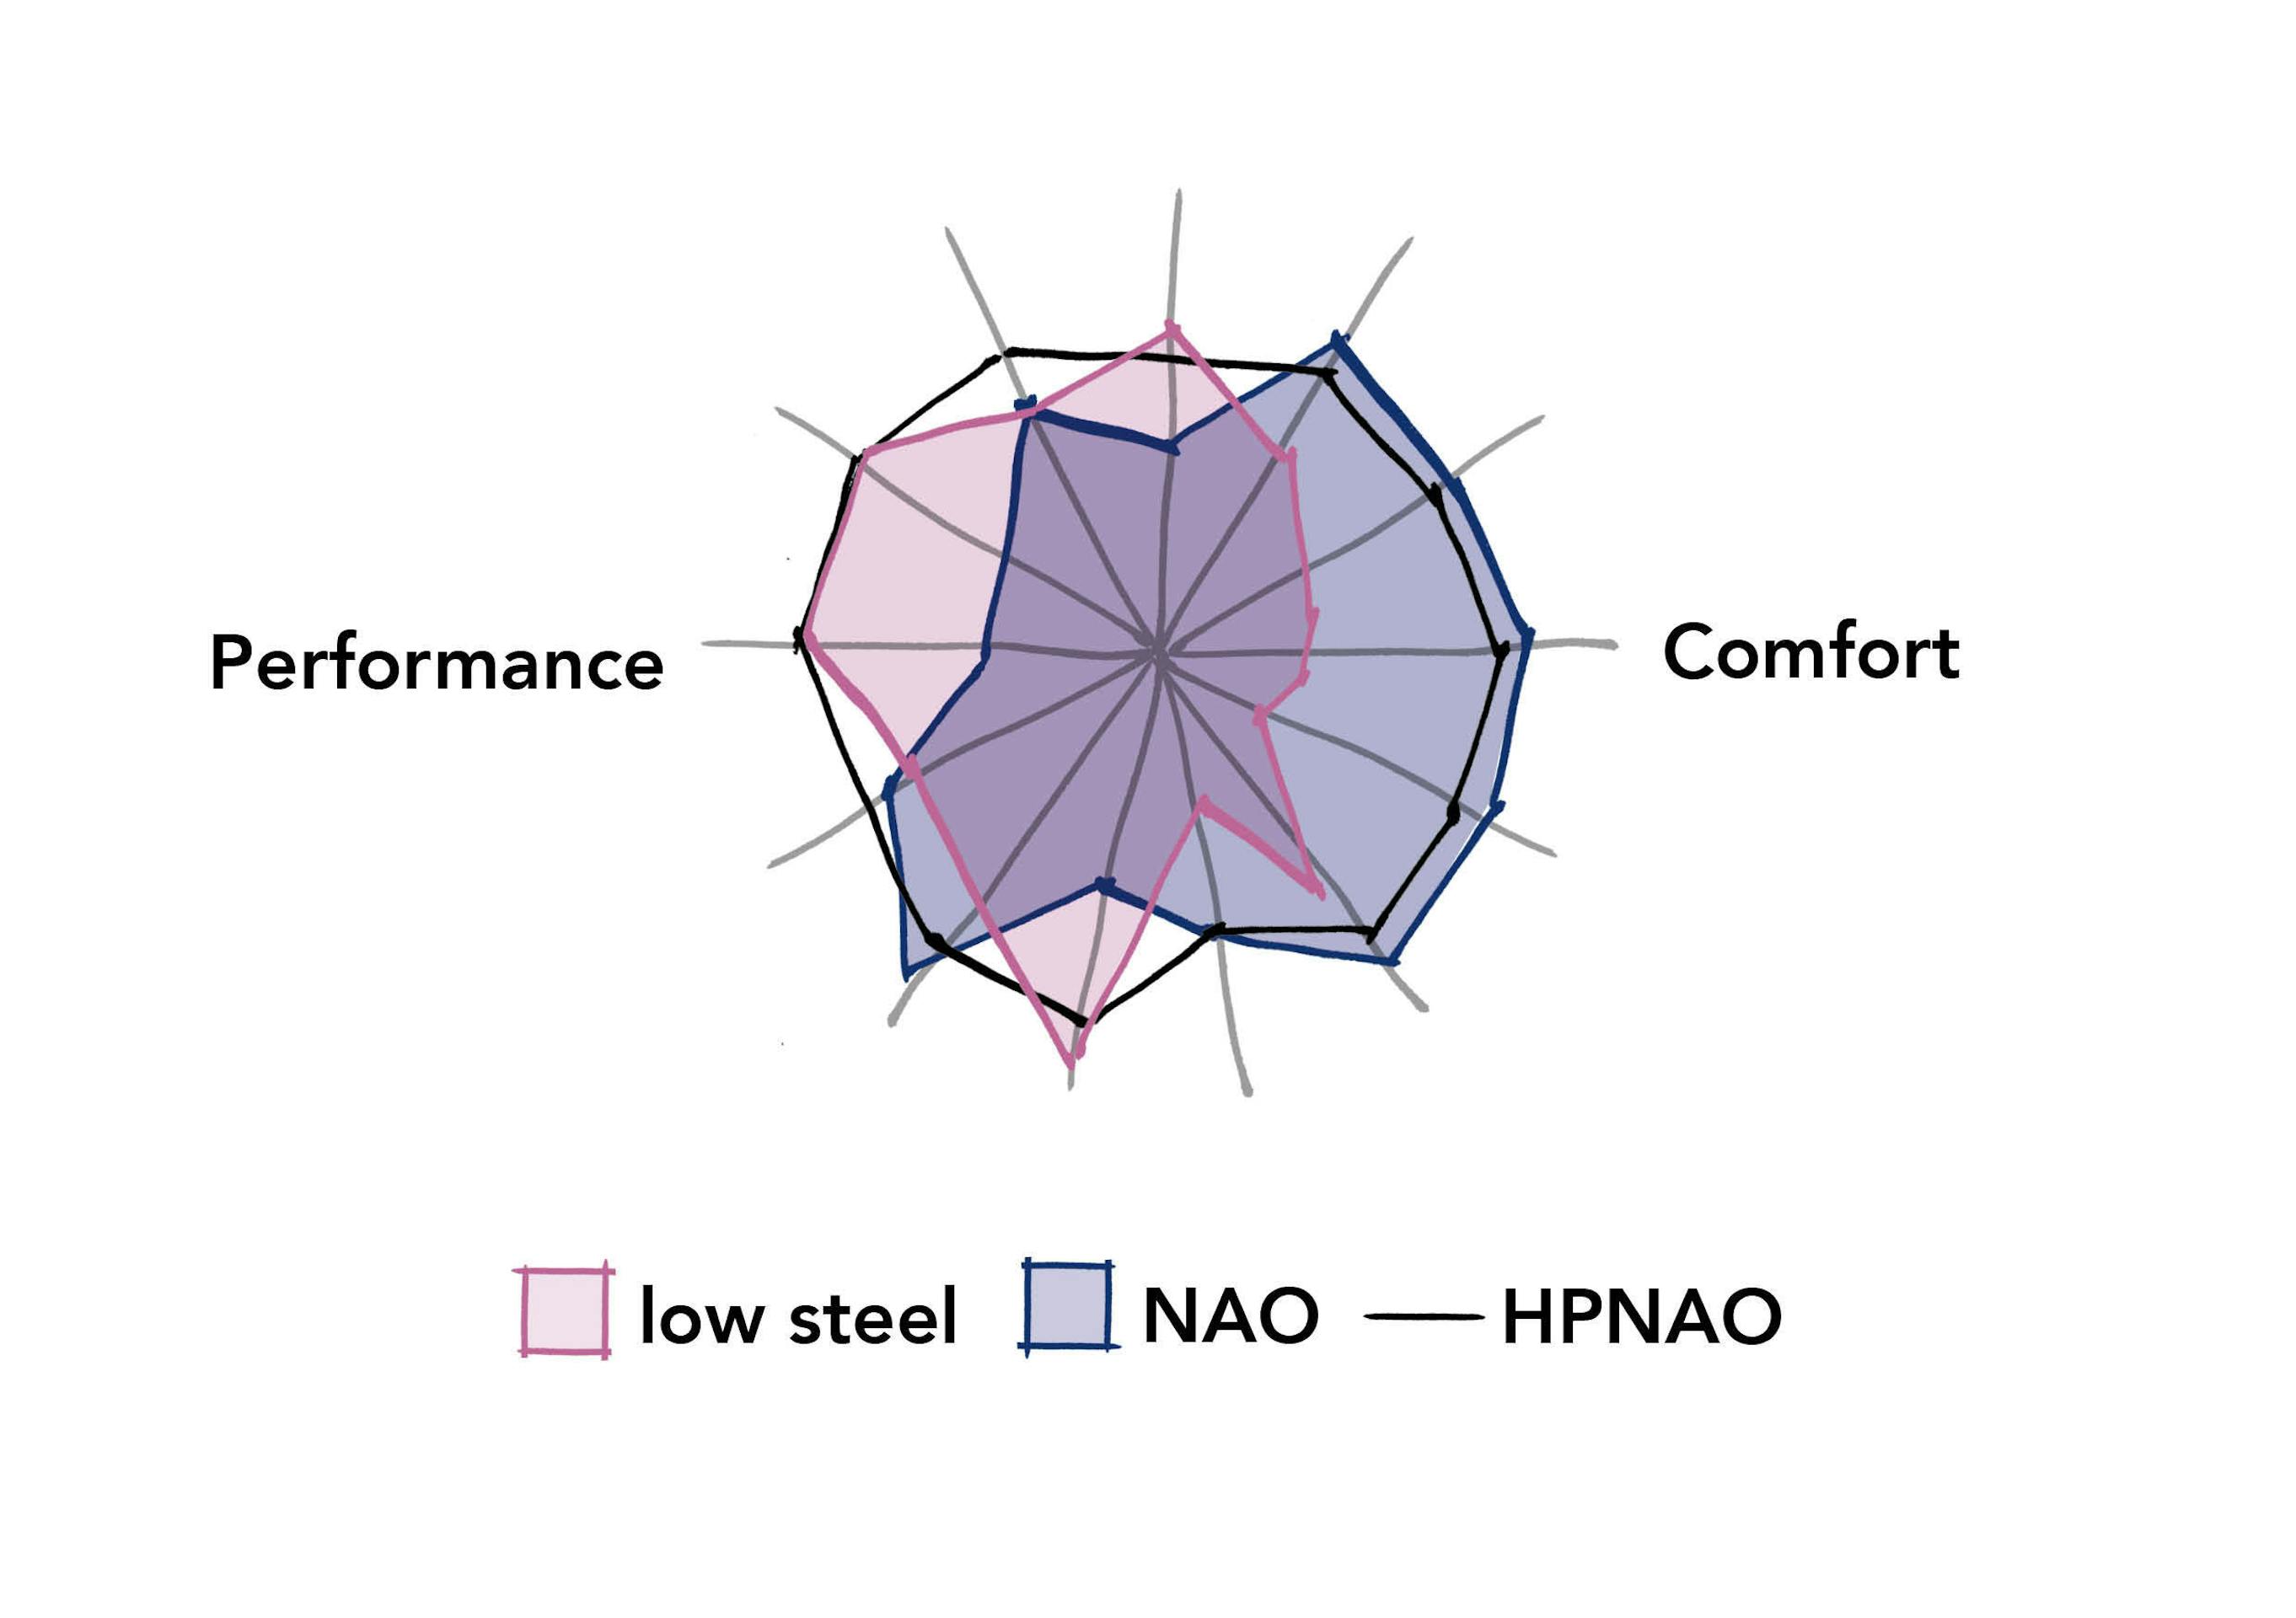 spider diagram showing the difference between NAO and low steel brake pads on comfort and performance.